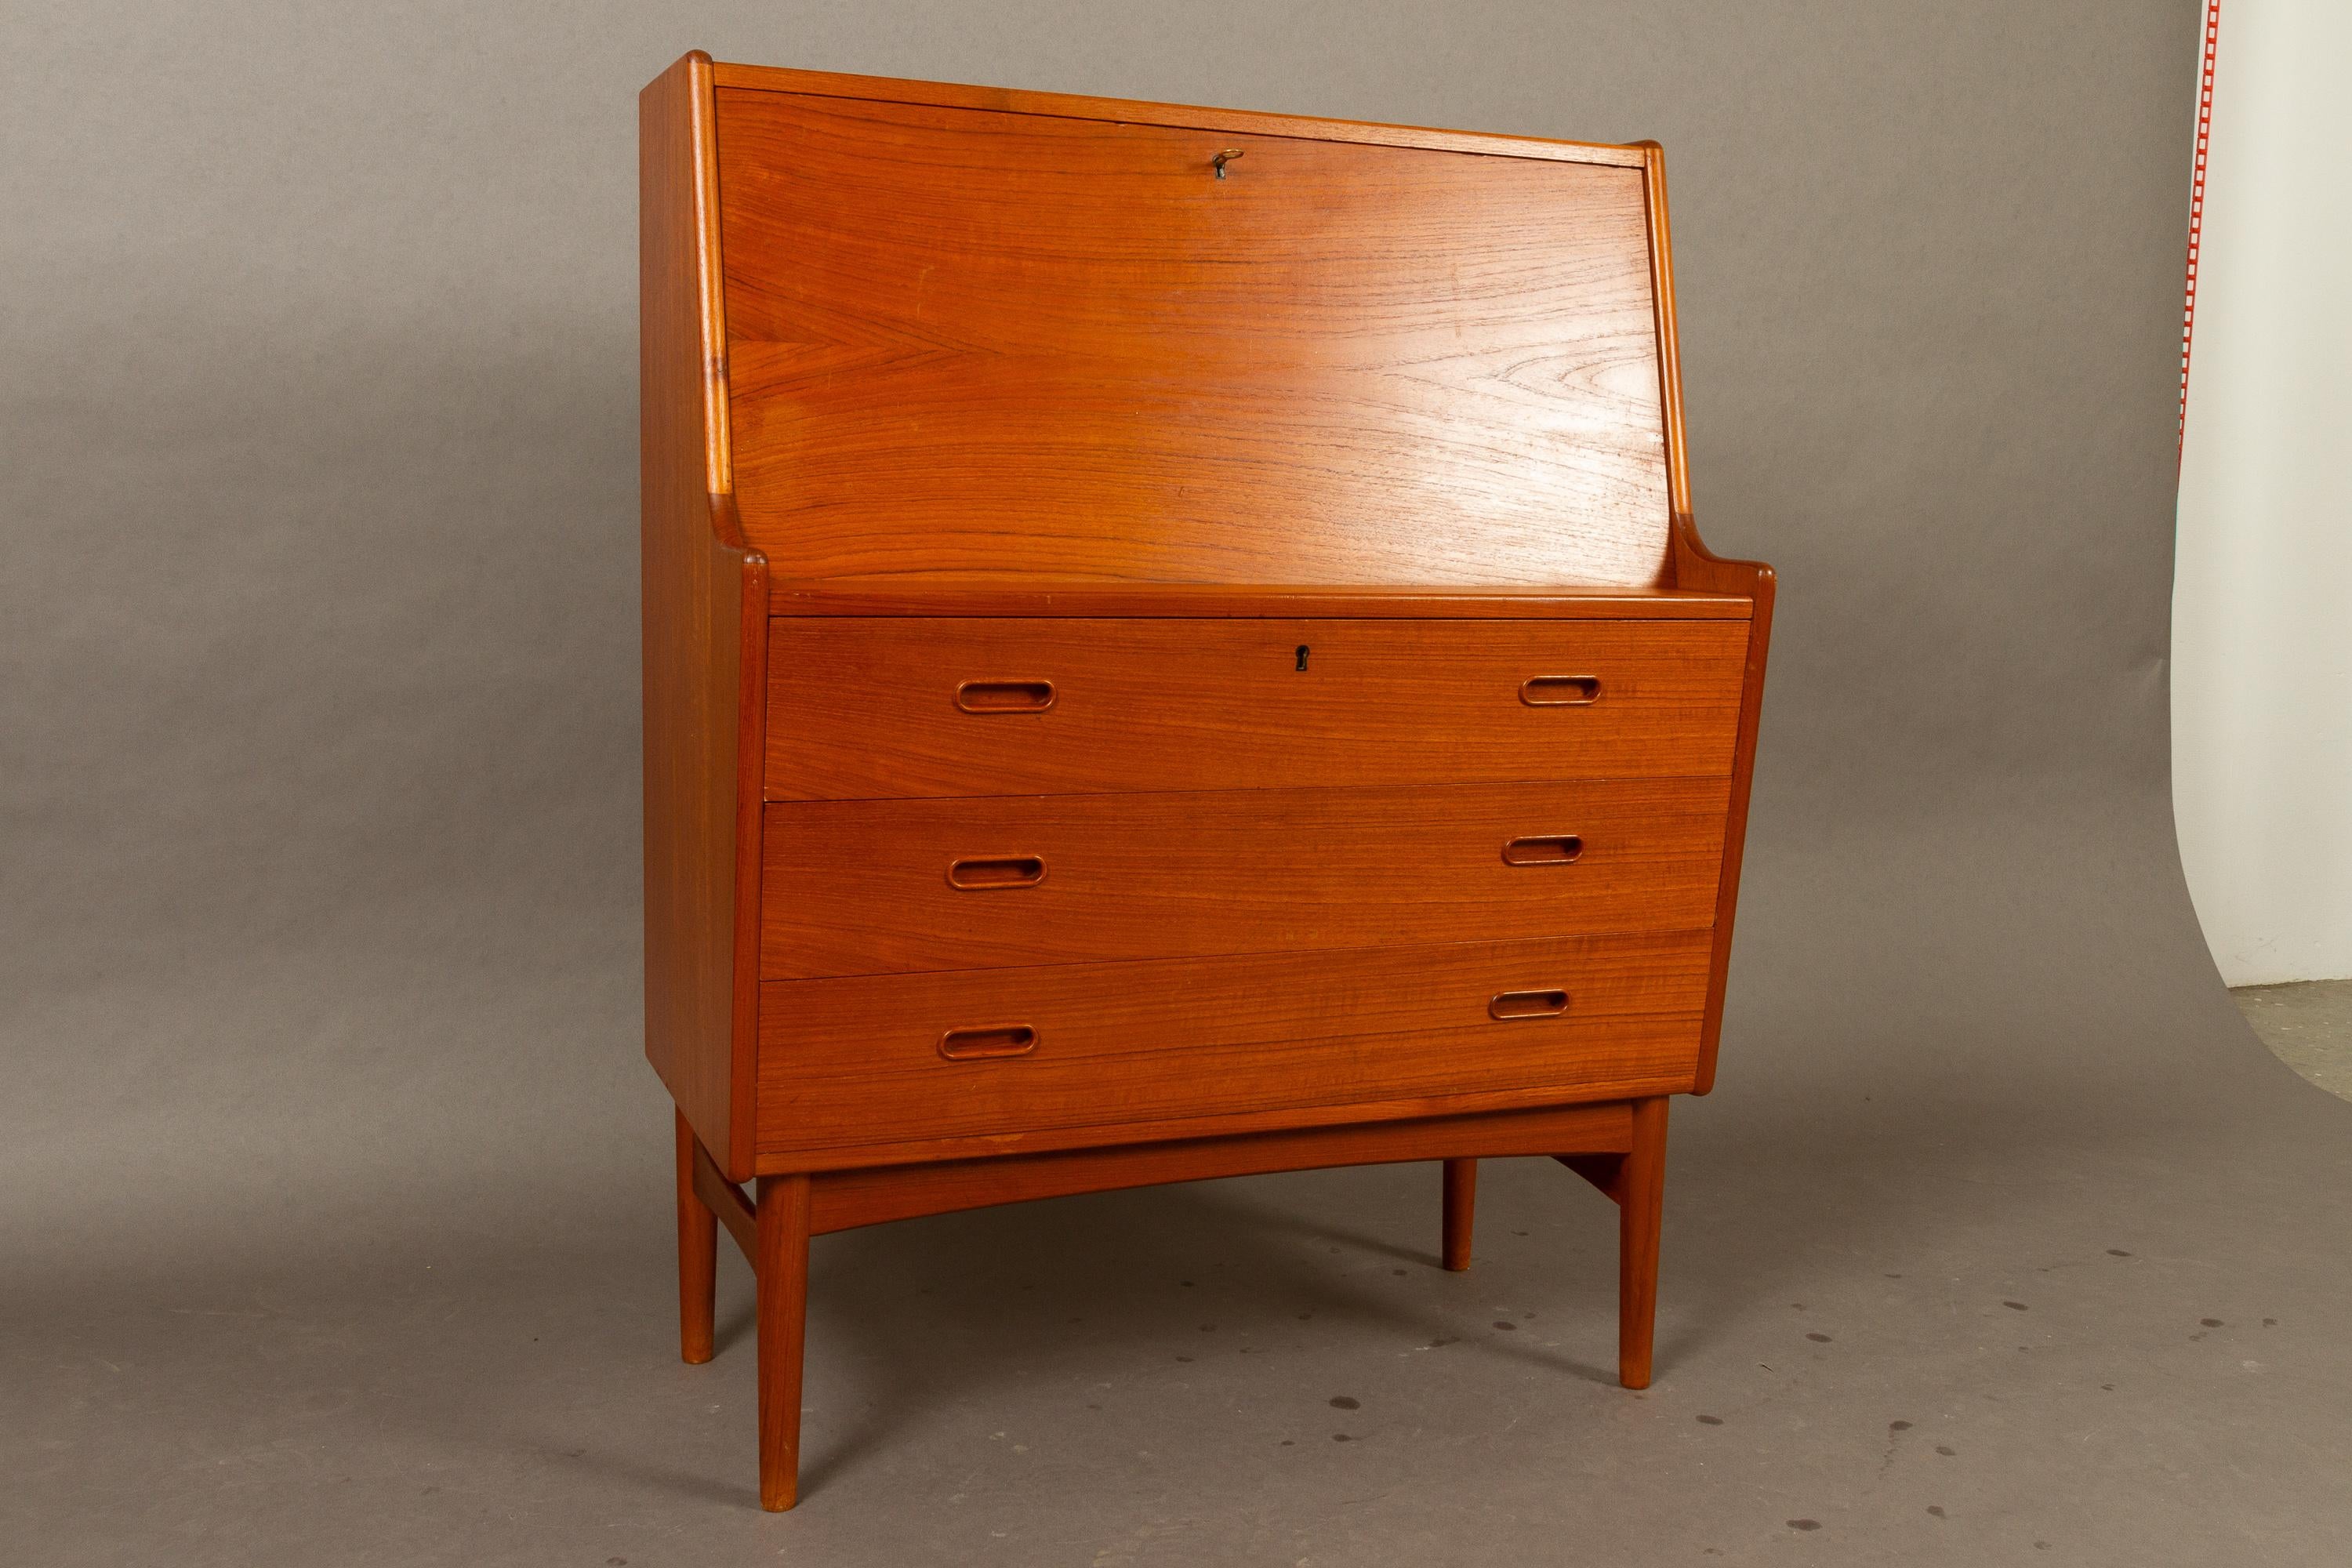 Danish teak secretaire model 37 by Arne Wahl Iversen for Vinde Møbelfabrik, 1960s
Classic Danish Mid-Century Modern secretary in teak with drop down tabletop with a lock. Doubles as a desk and chest of drawers. High of tabletop when dropped down is